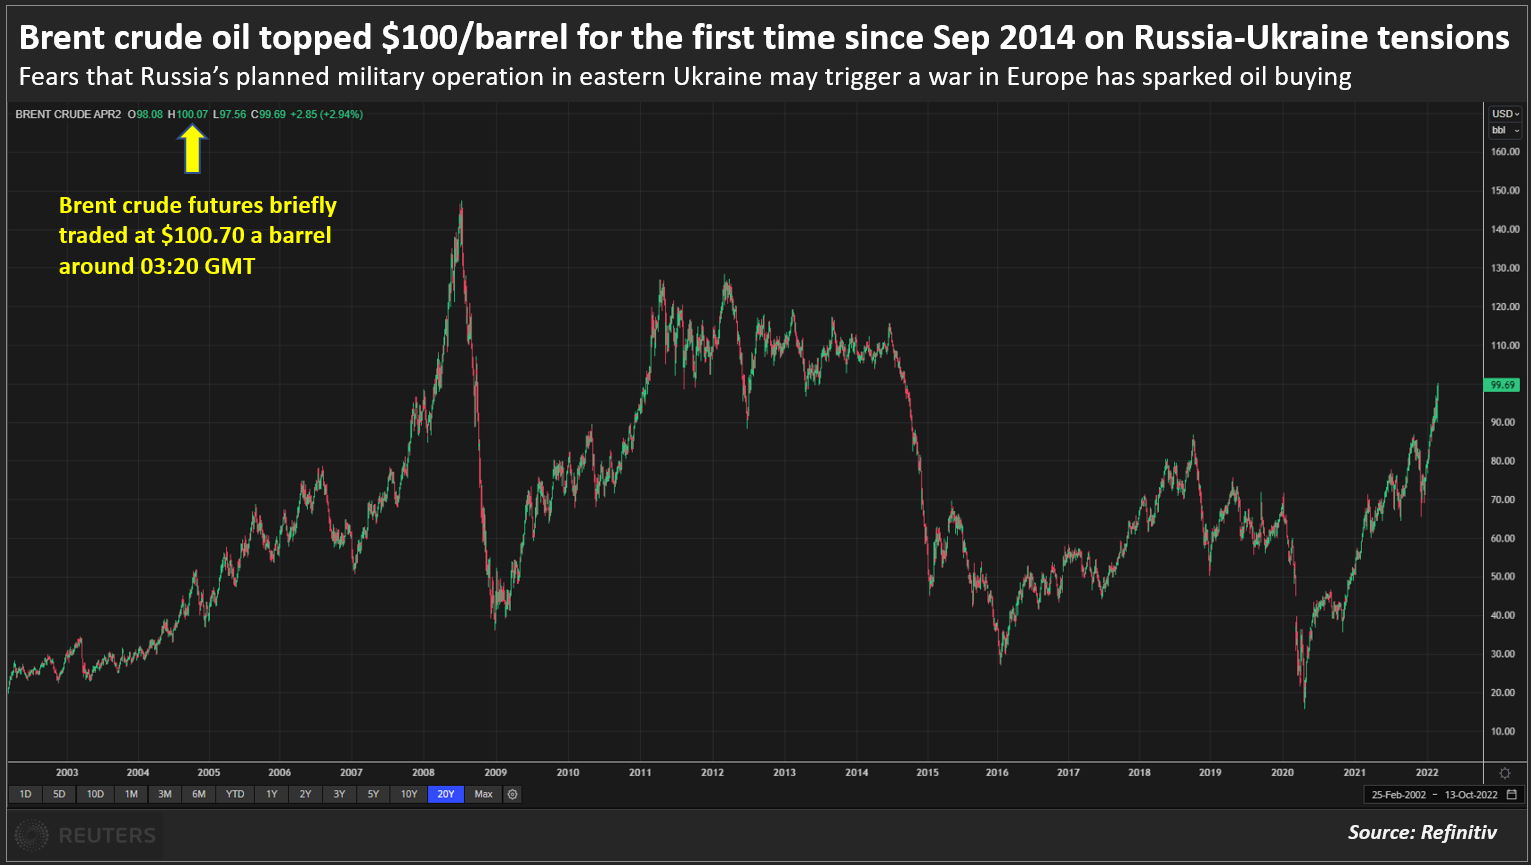 Brent crude oil topped $100/barrel for the first time since Sep 2014 on Russia-Ukraine tensions